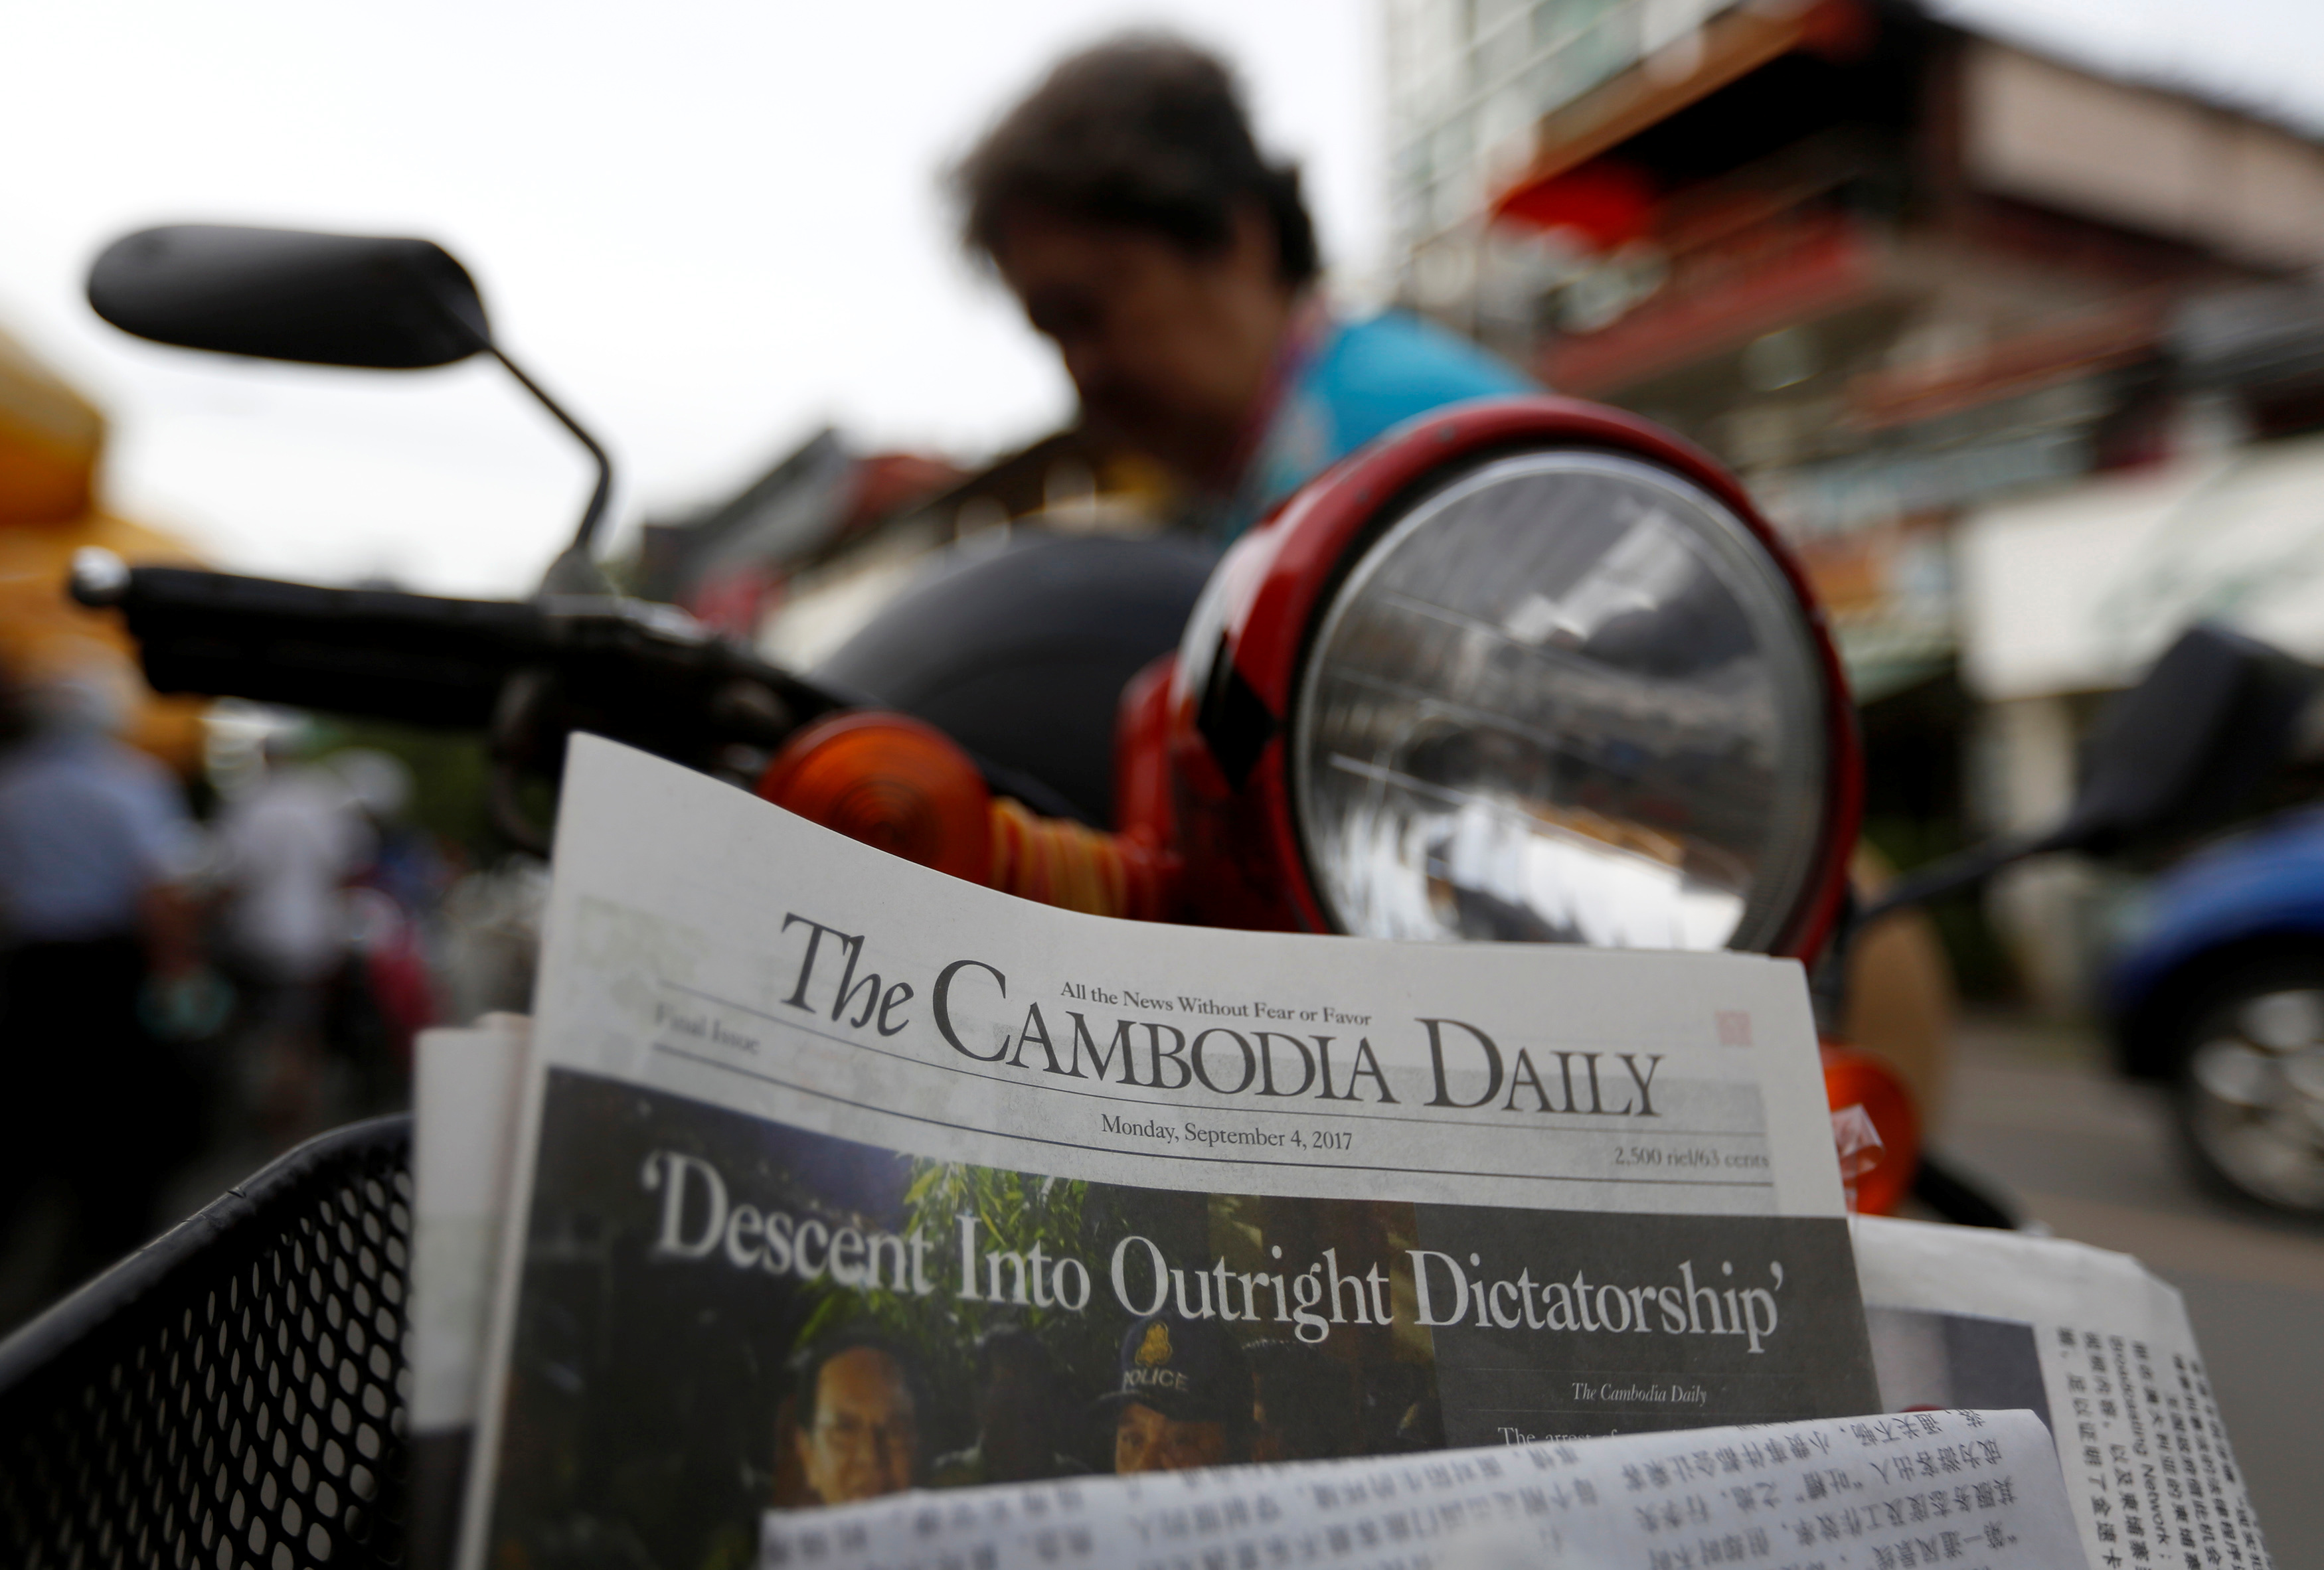 A woman buys the final issue of The Cambodia Daily newspaper at a store along a street in Phnom Penh, Cambodia, Sept. 4, 2017. (Pring Samrang—Reuters)